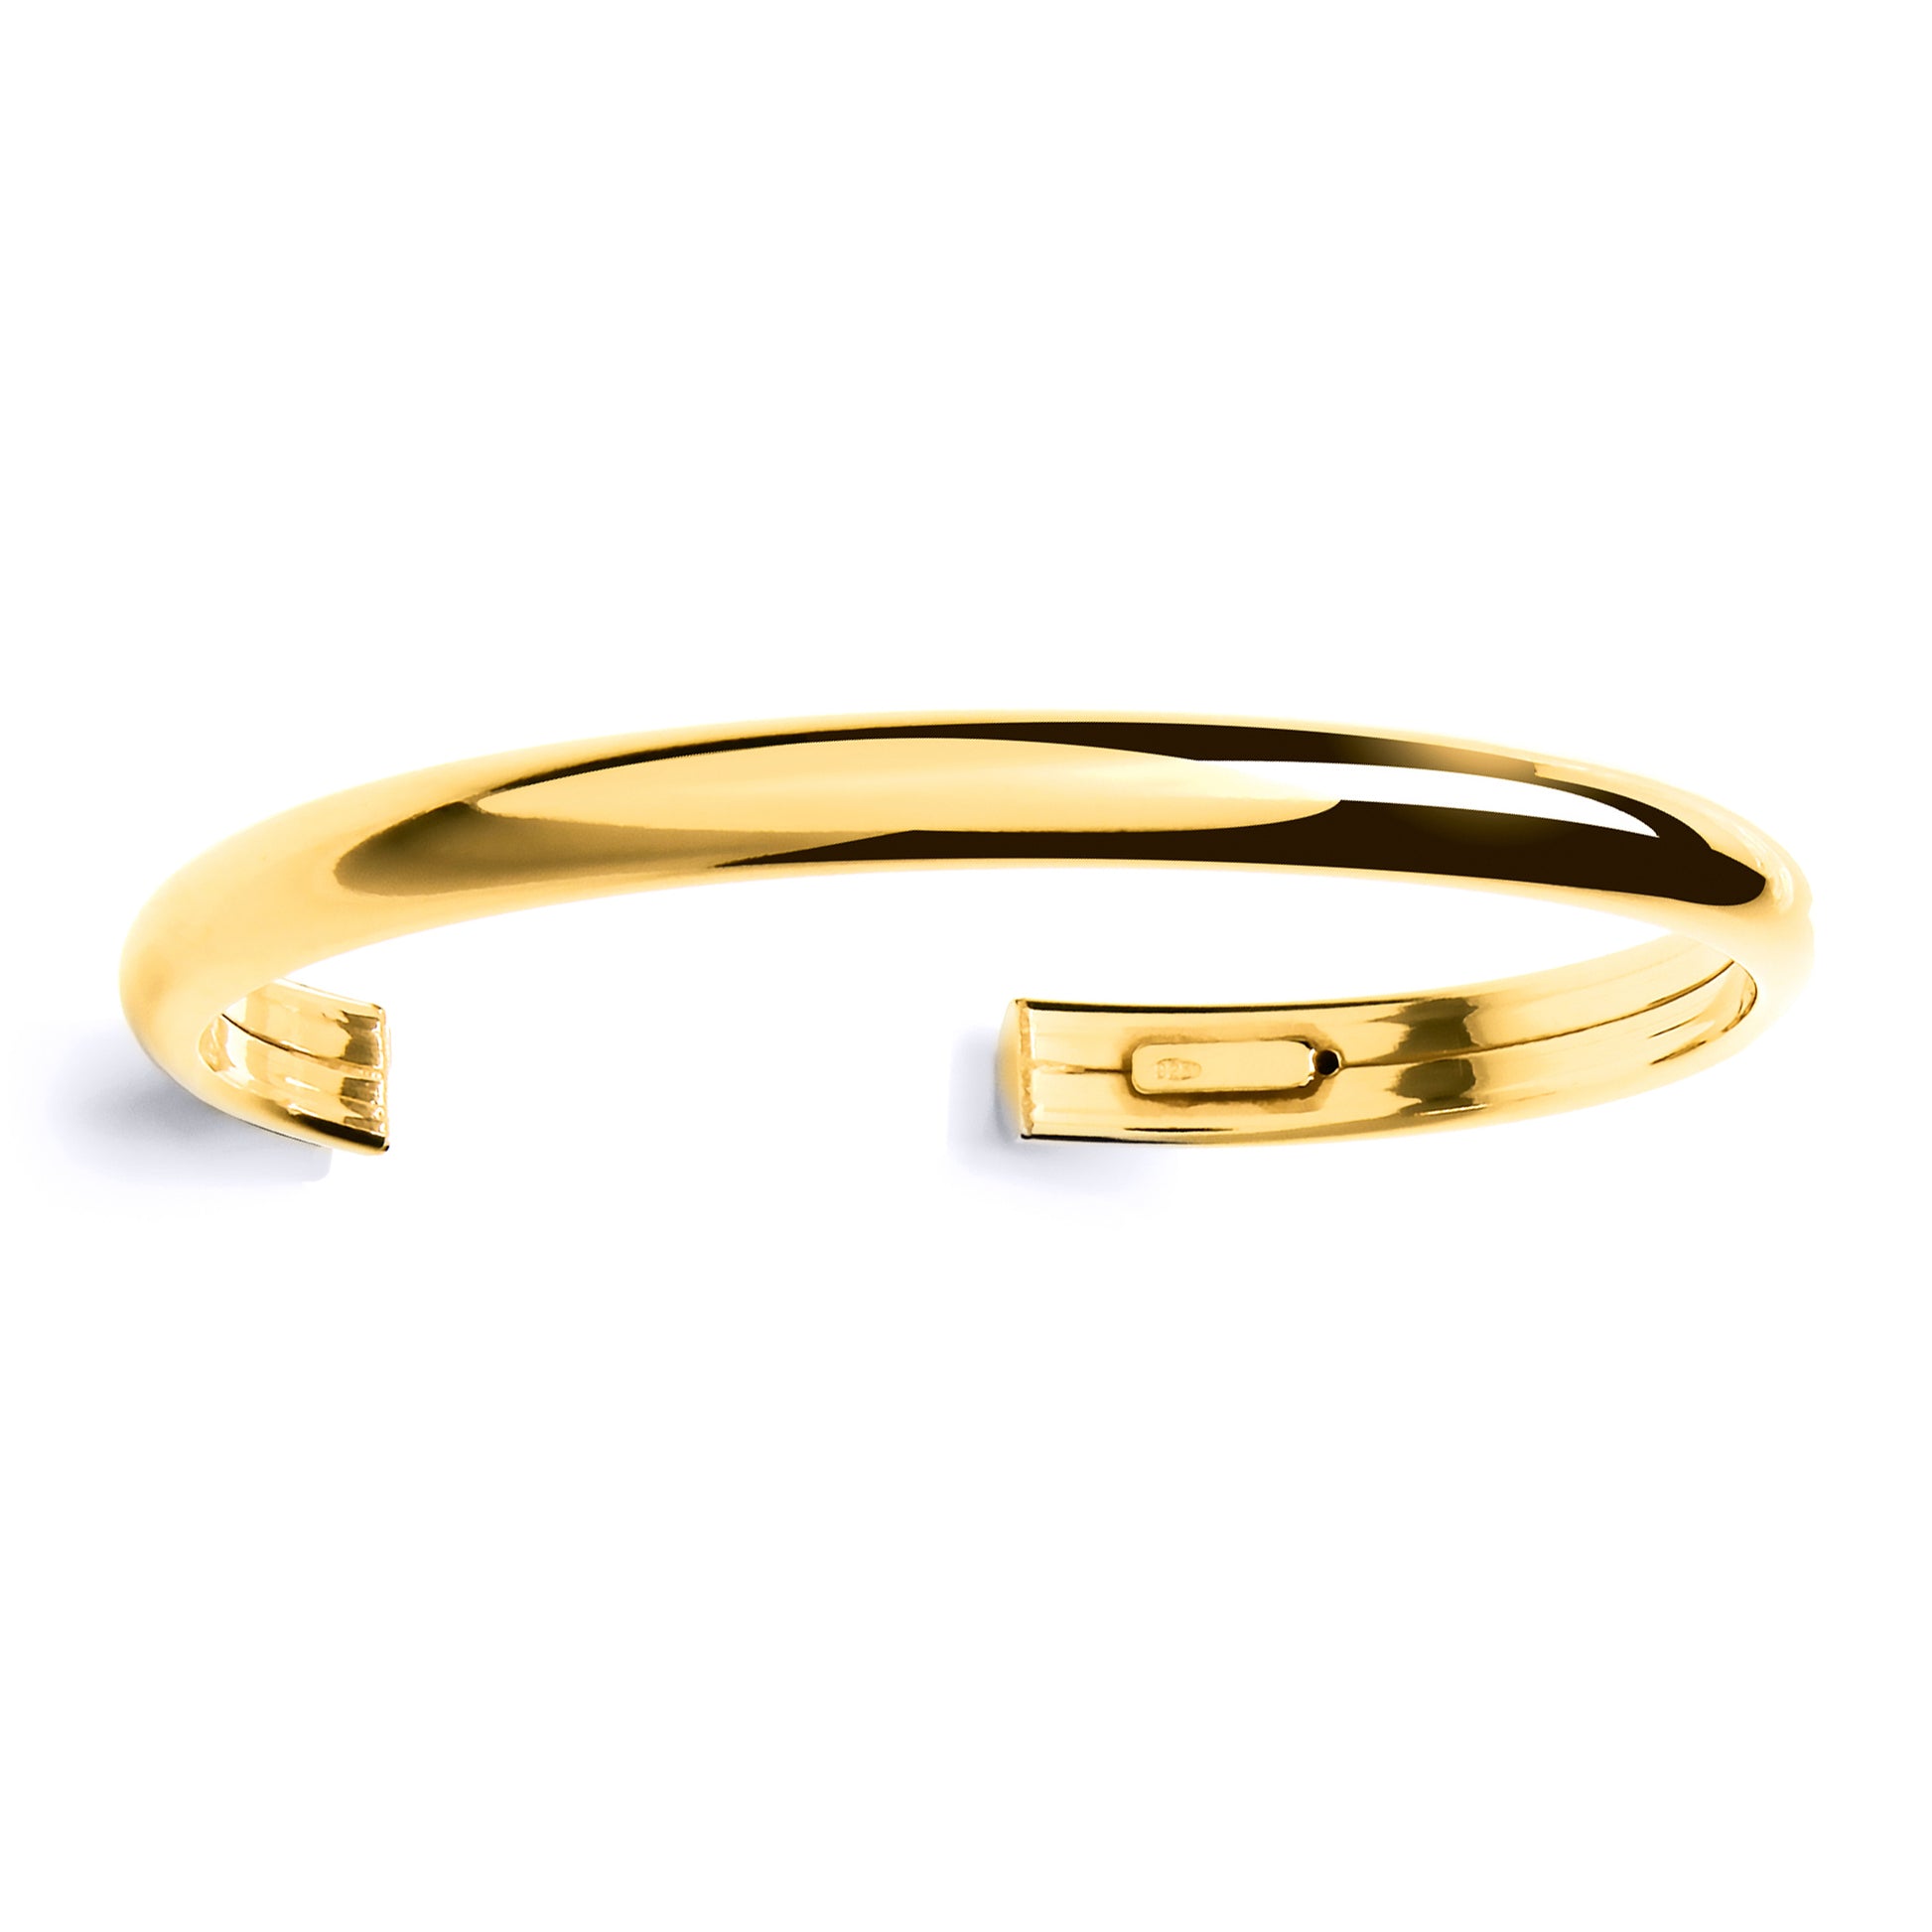 Gilded Silver  Dome Torque Cuff Bangle Bracelet - GVG176GOLD